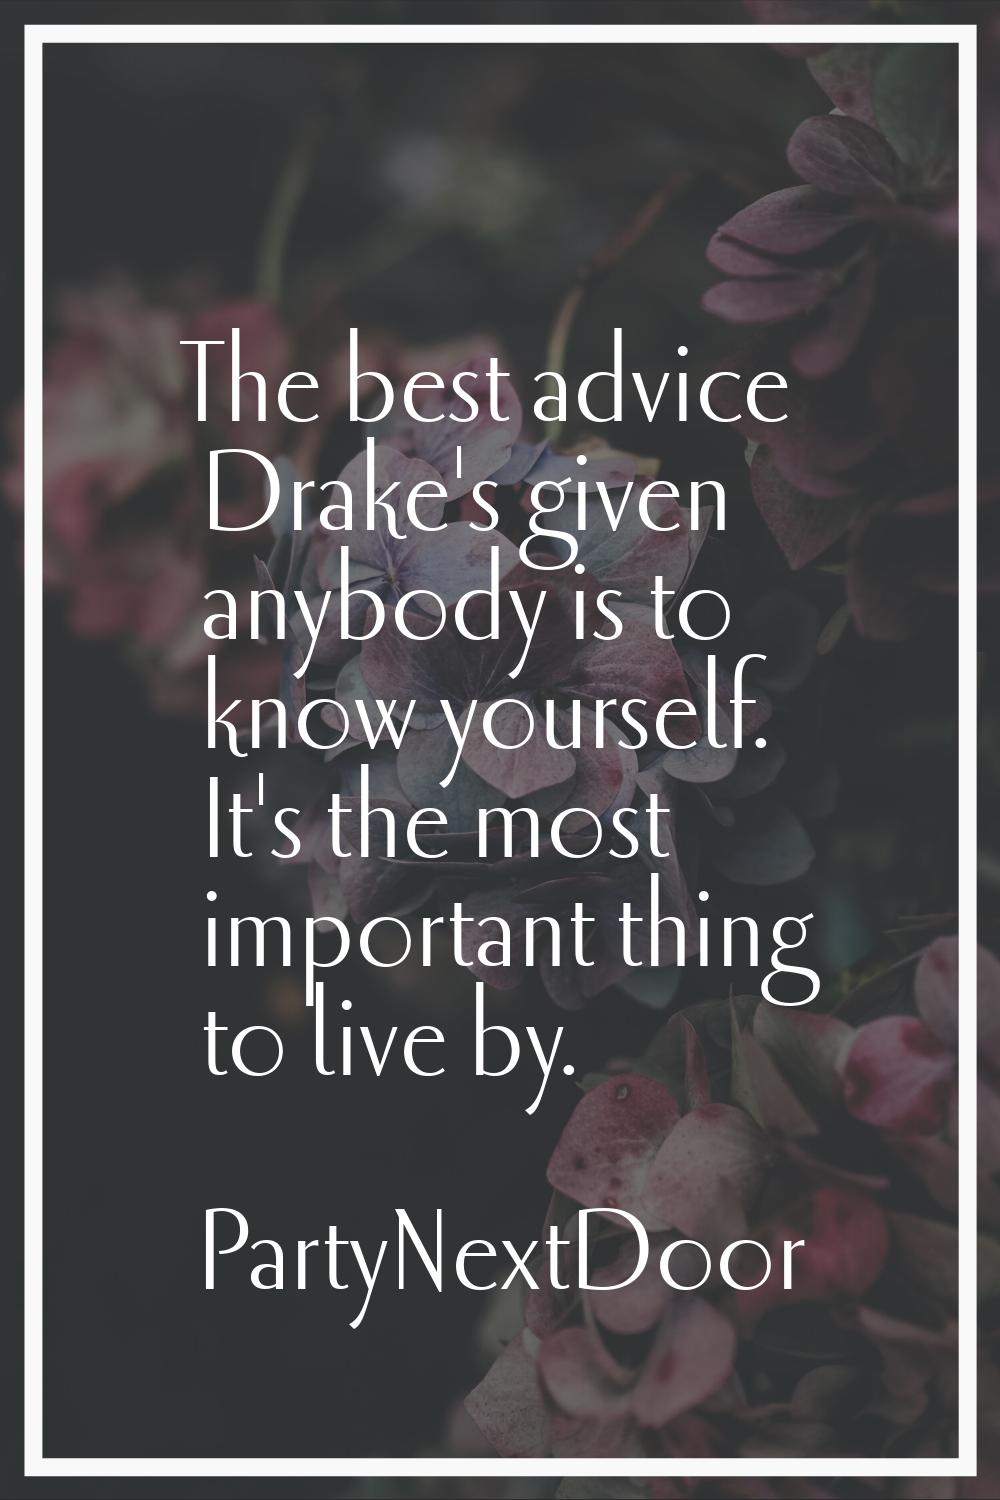 The best advice Drake's given anybody is to know yourself. It's the most important thing to live by